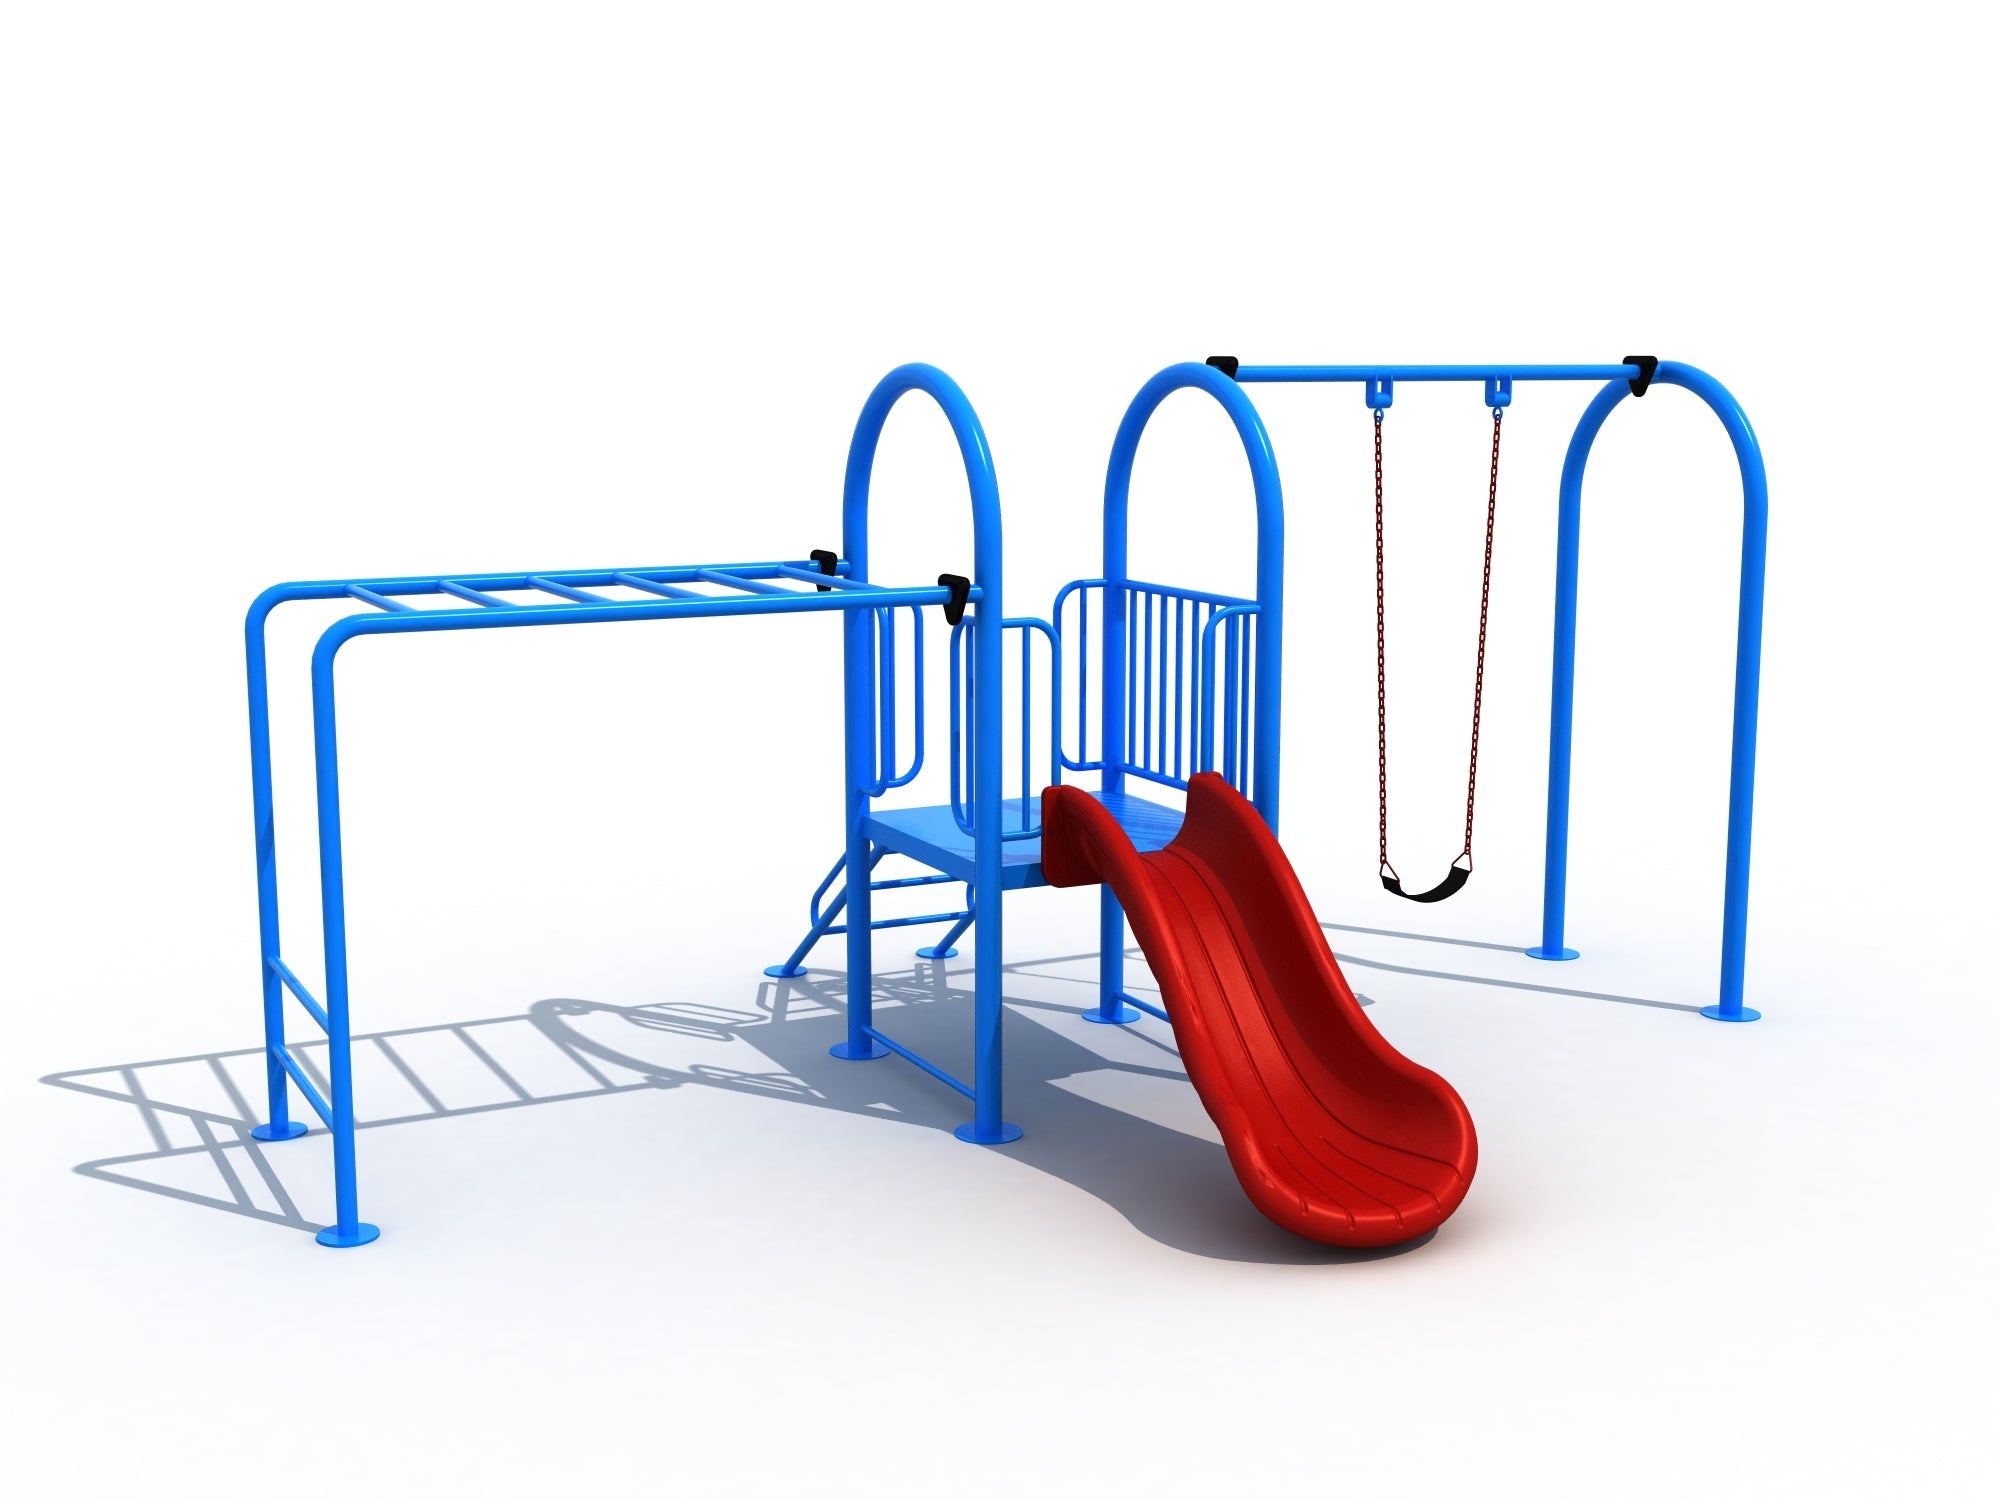 OUTDOOR Modular Swing Set (FY-12701)-Commercial Playgrounds-Flaman Family-1